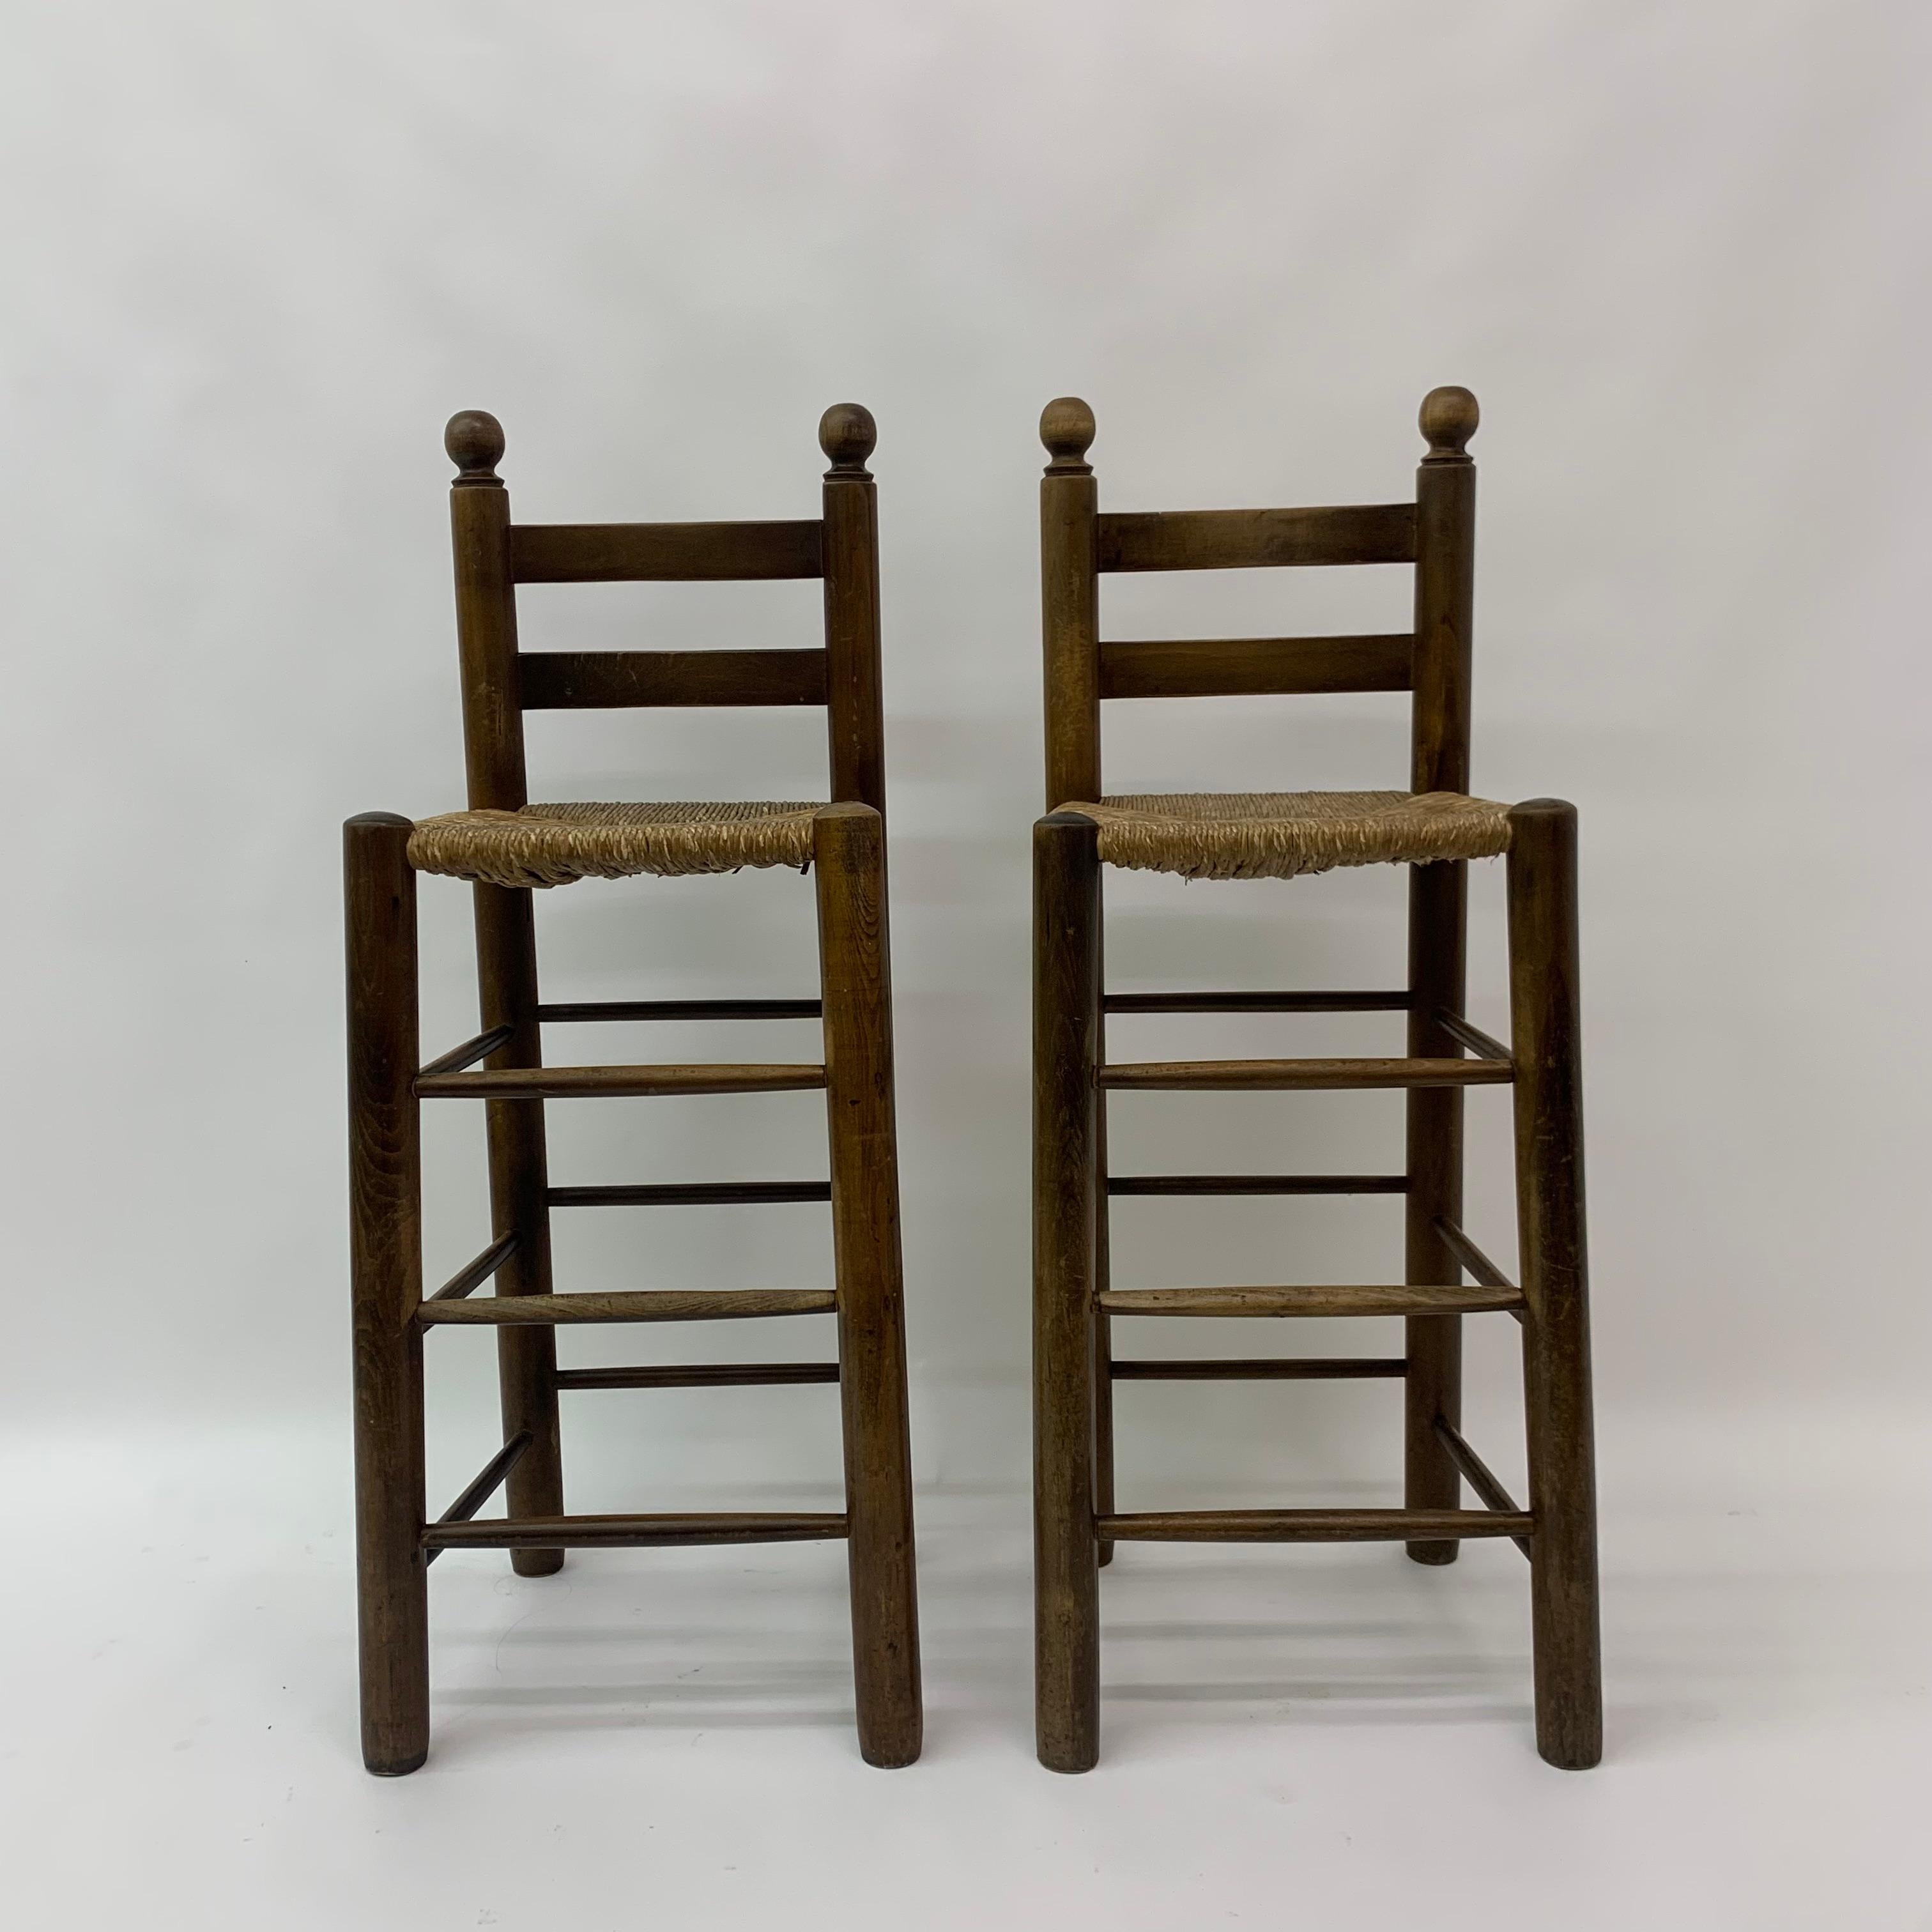 Set of 2 solid wooden bar stools, 1970’s.